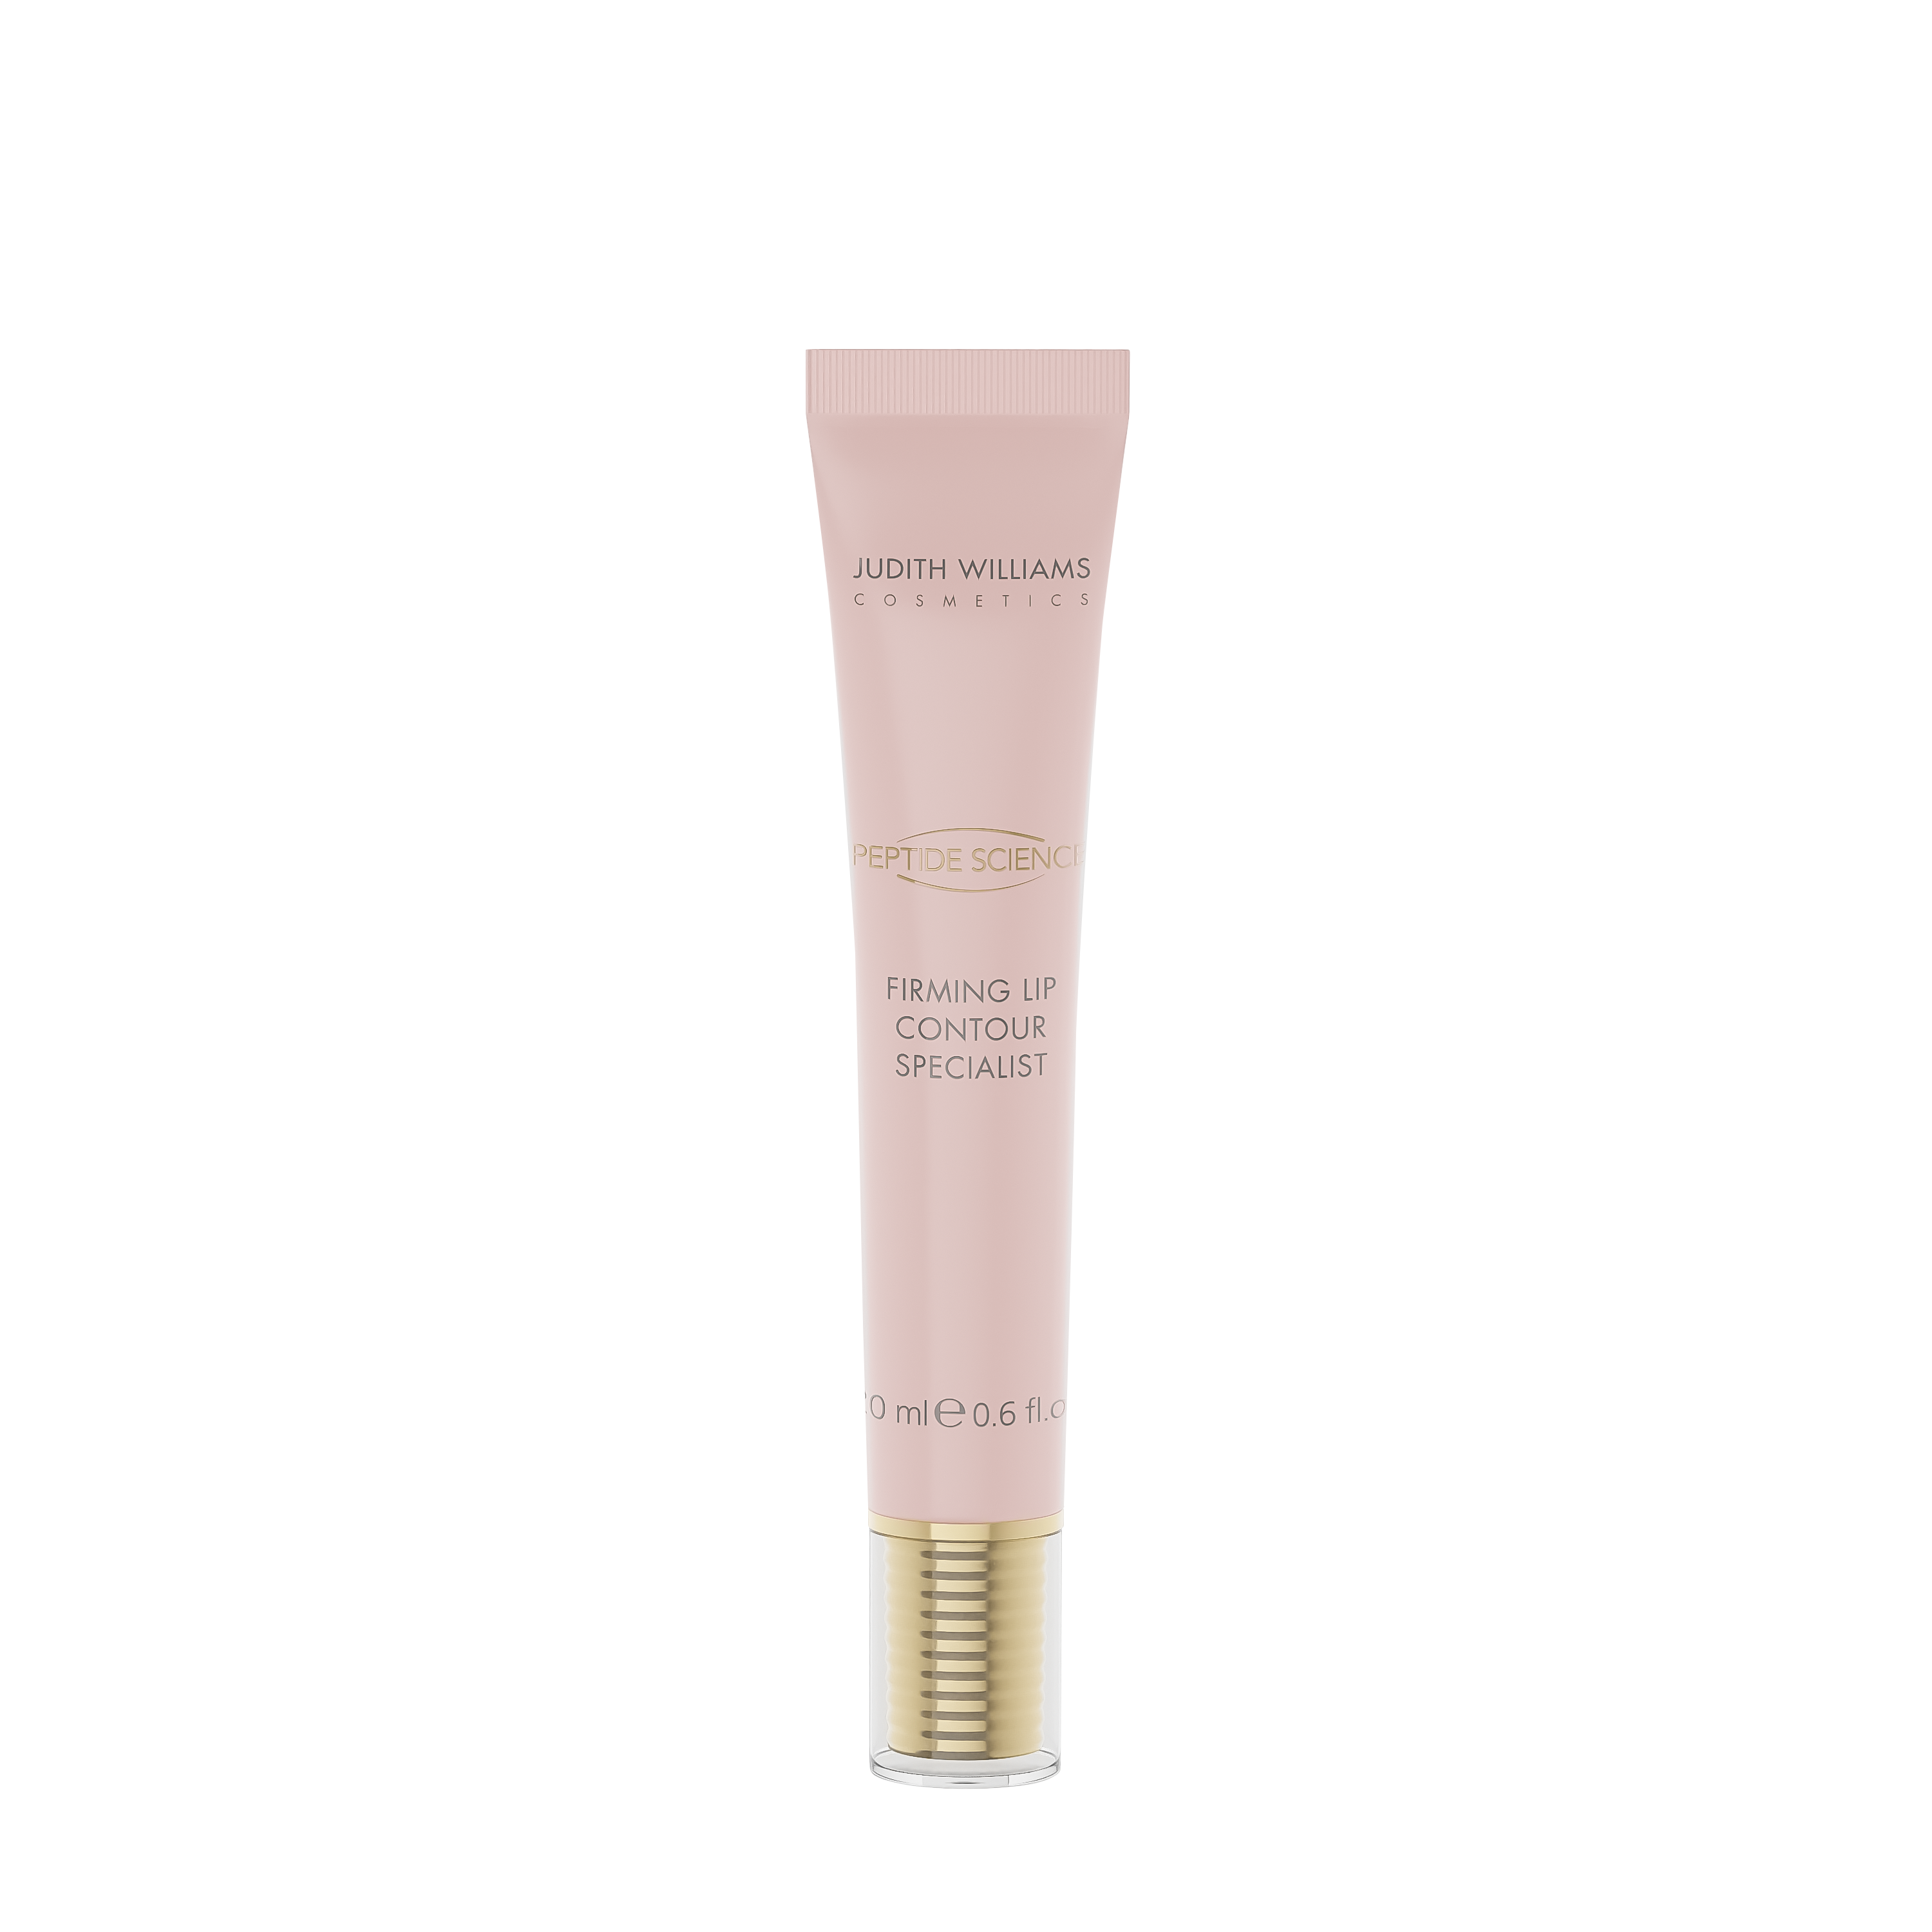 Peptide Science Firming Lip Contour Specialist